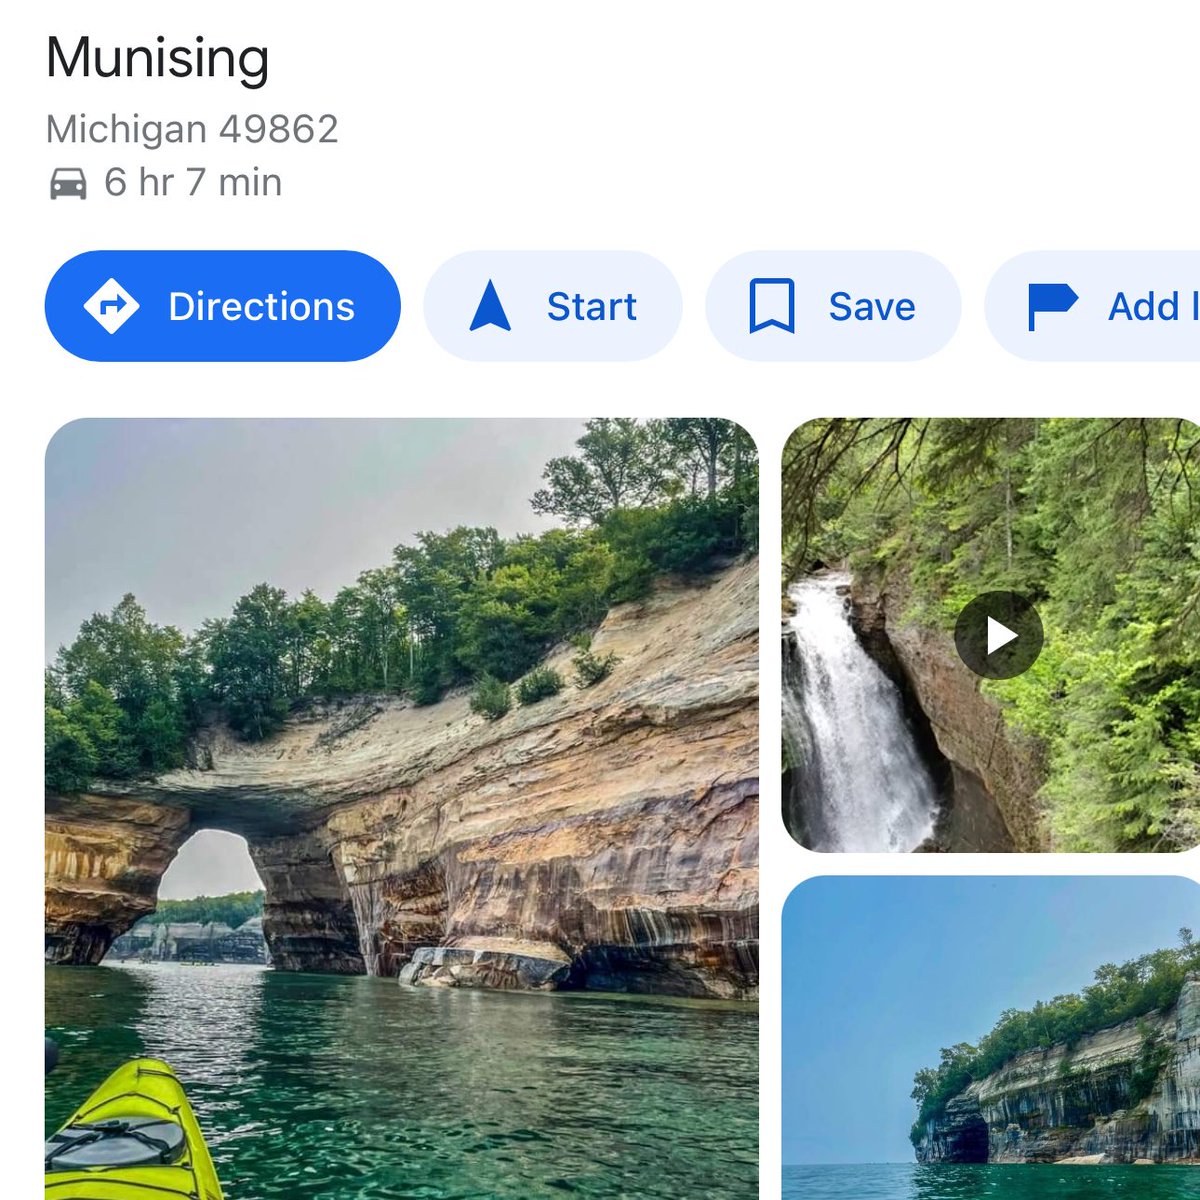 @north0fnorth What do you know about Munising, MI?